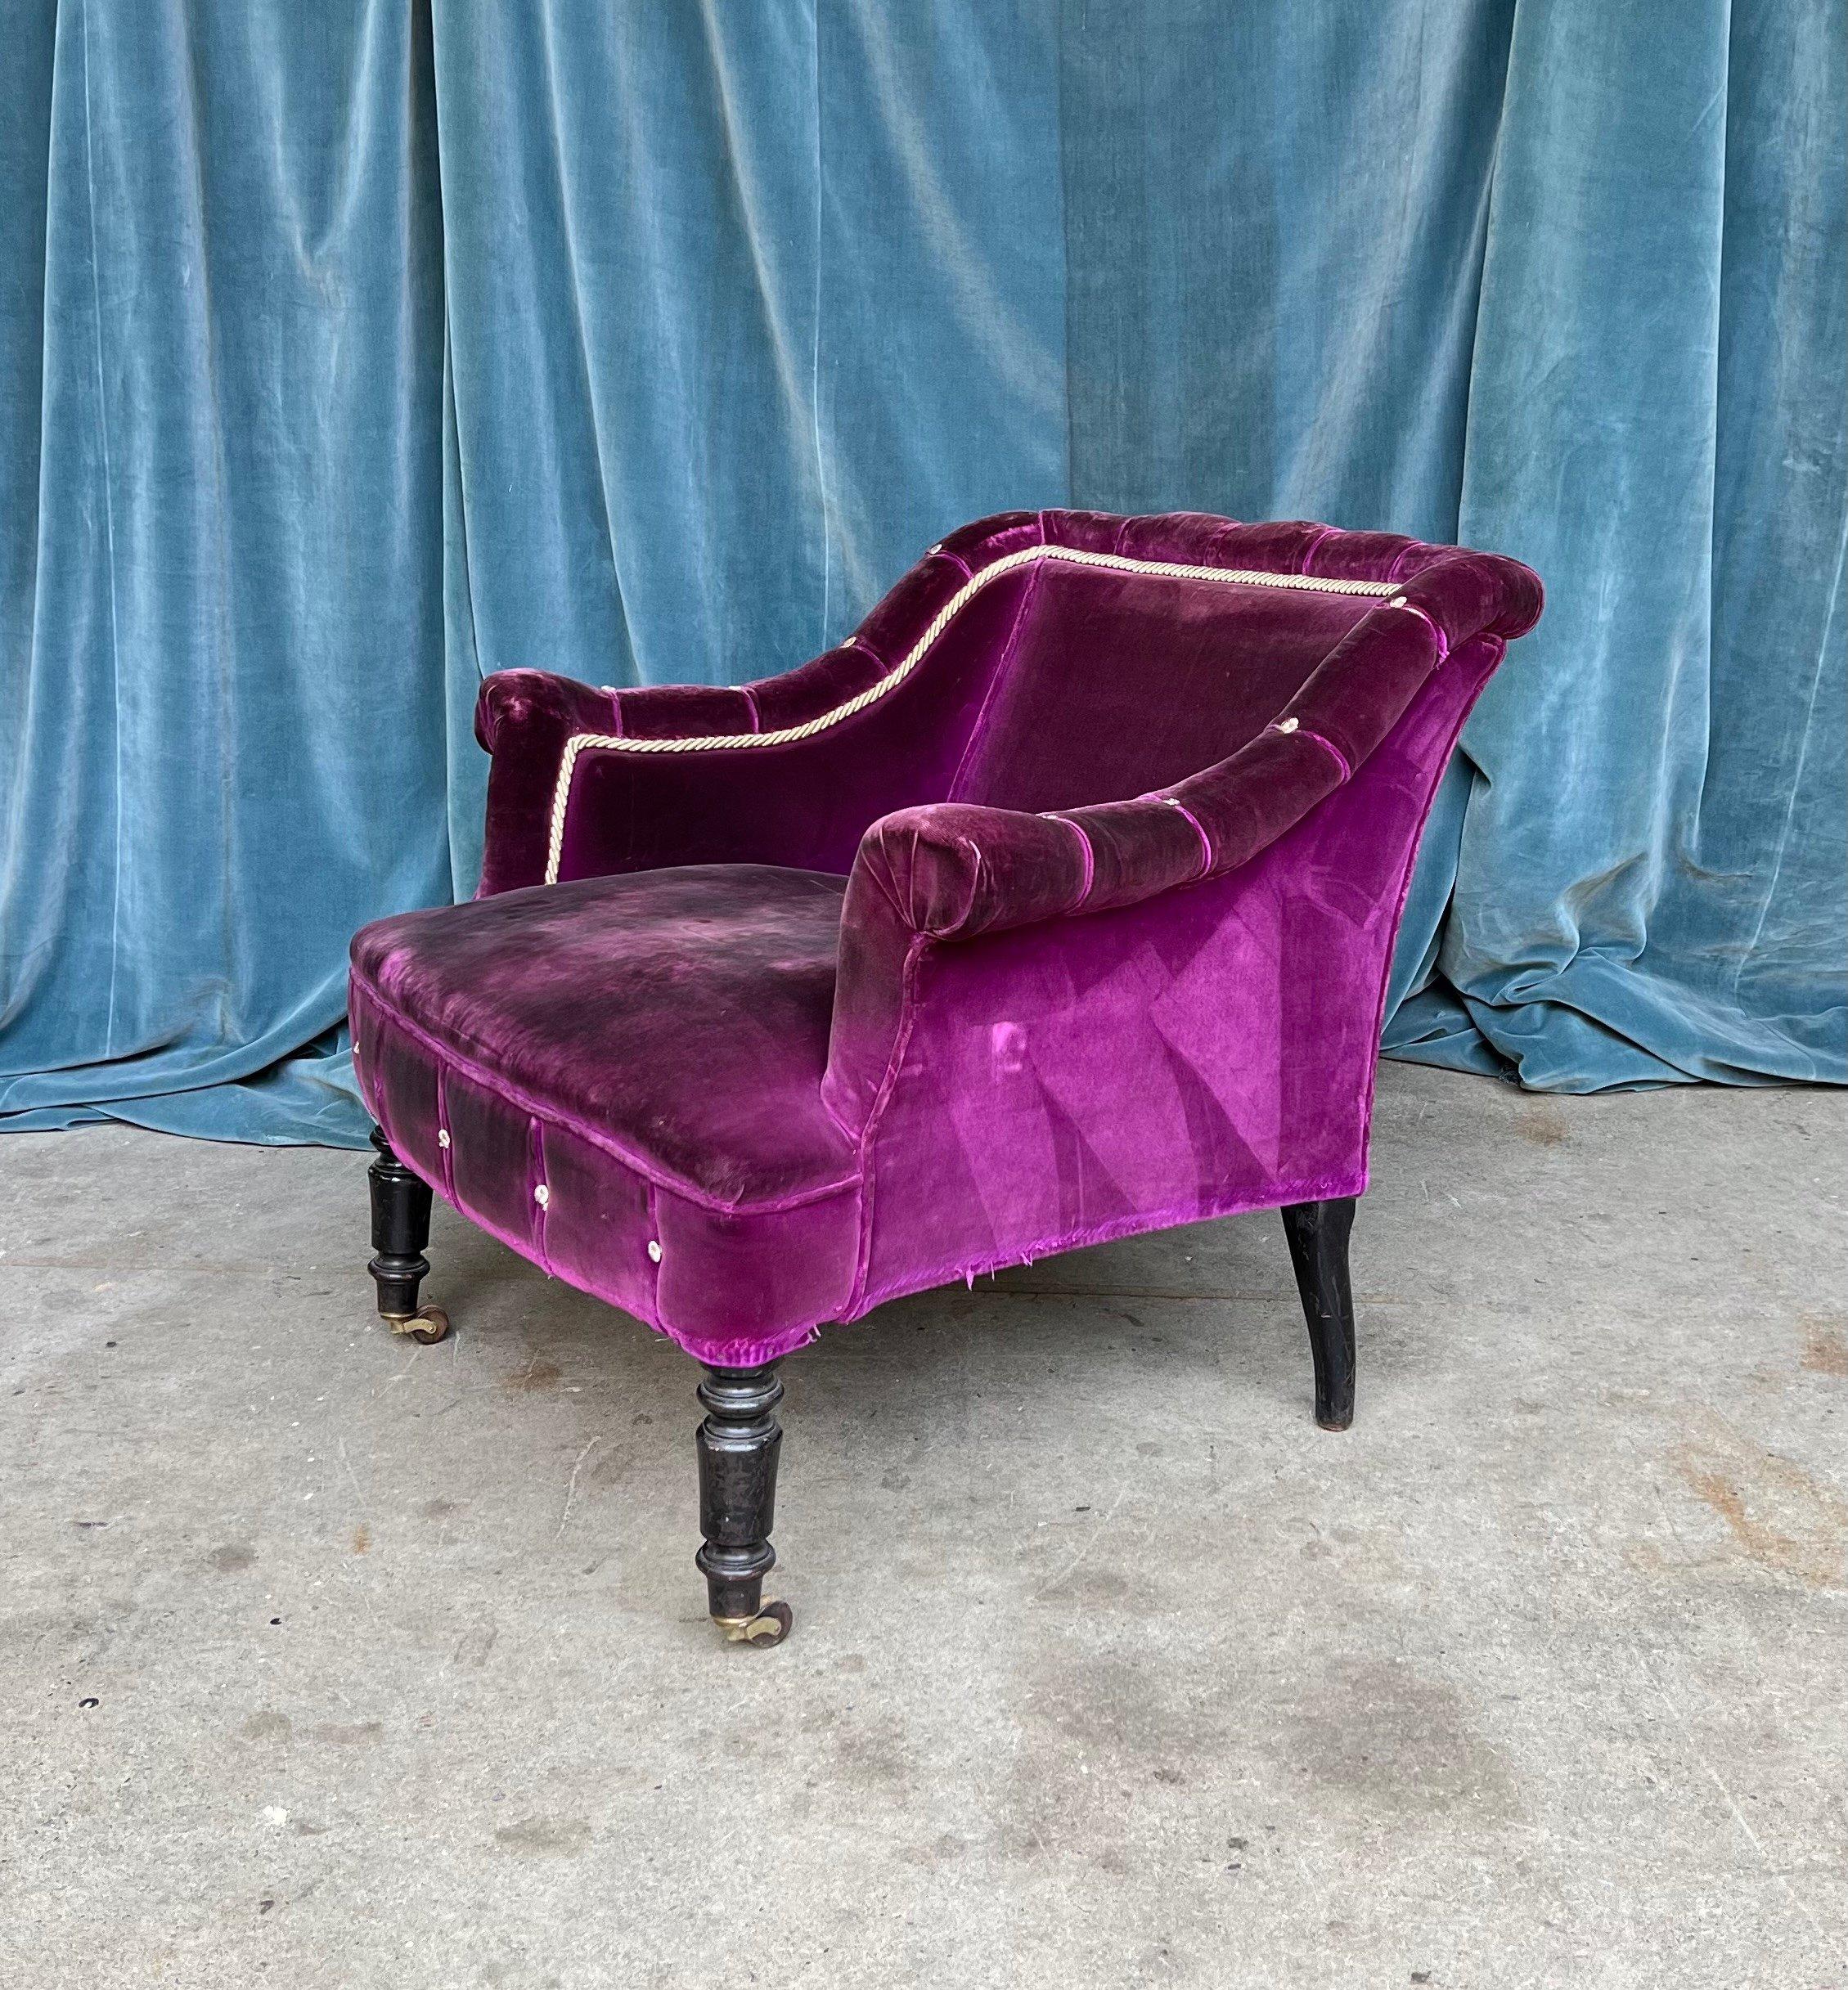 A captivating French 19th century distressed purple velvet armchair. Crafted in 19th century France, in the distinctive Napoleon III style, this armchair is elegant and timeless. It features low bankrolled arms, white braiding and buttons, and